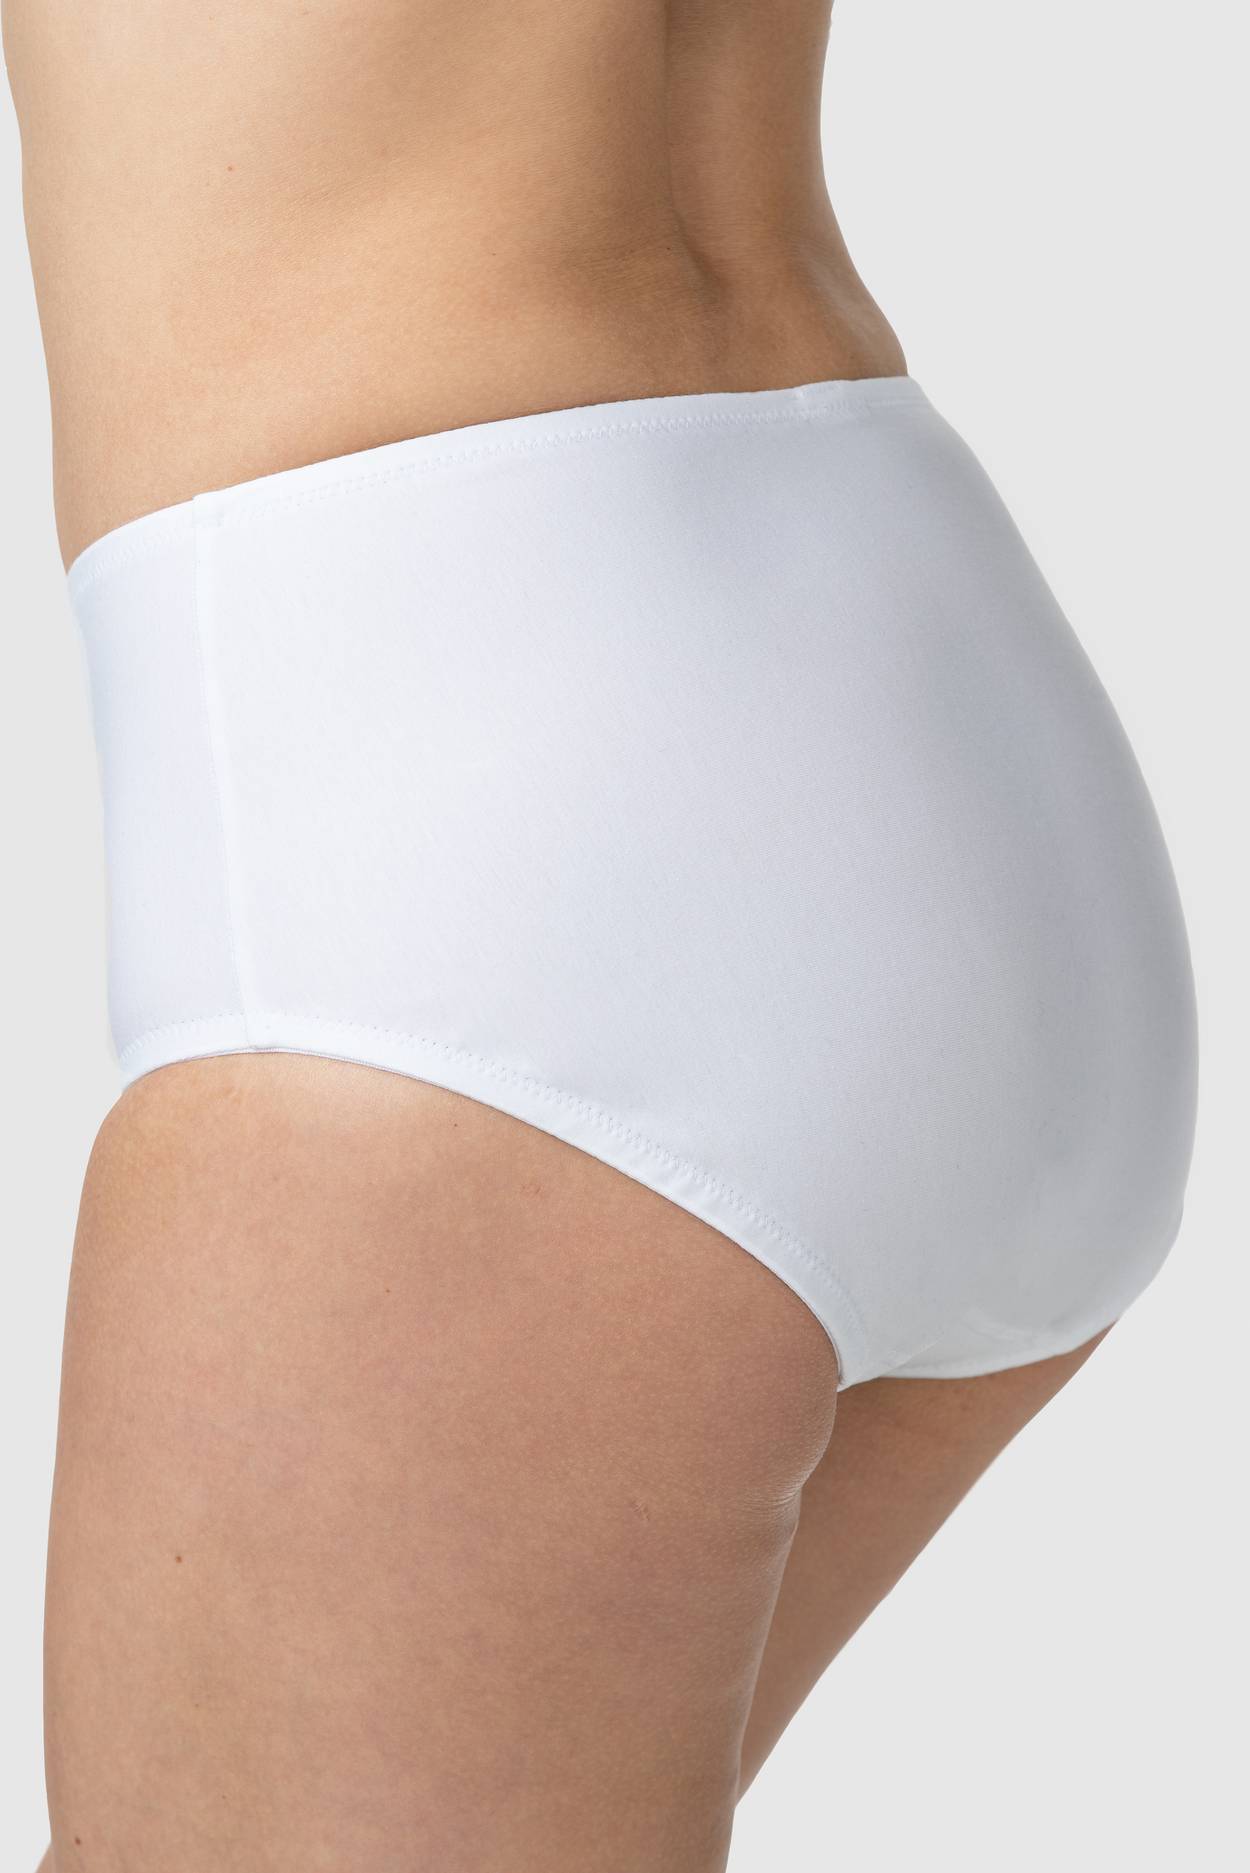 Broderie Anglaise panty girdle